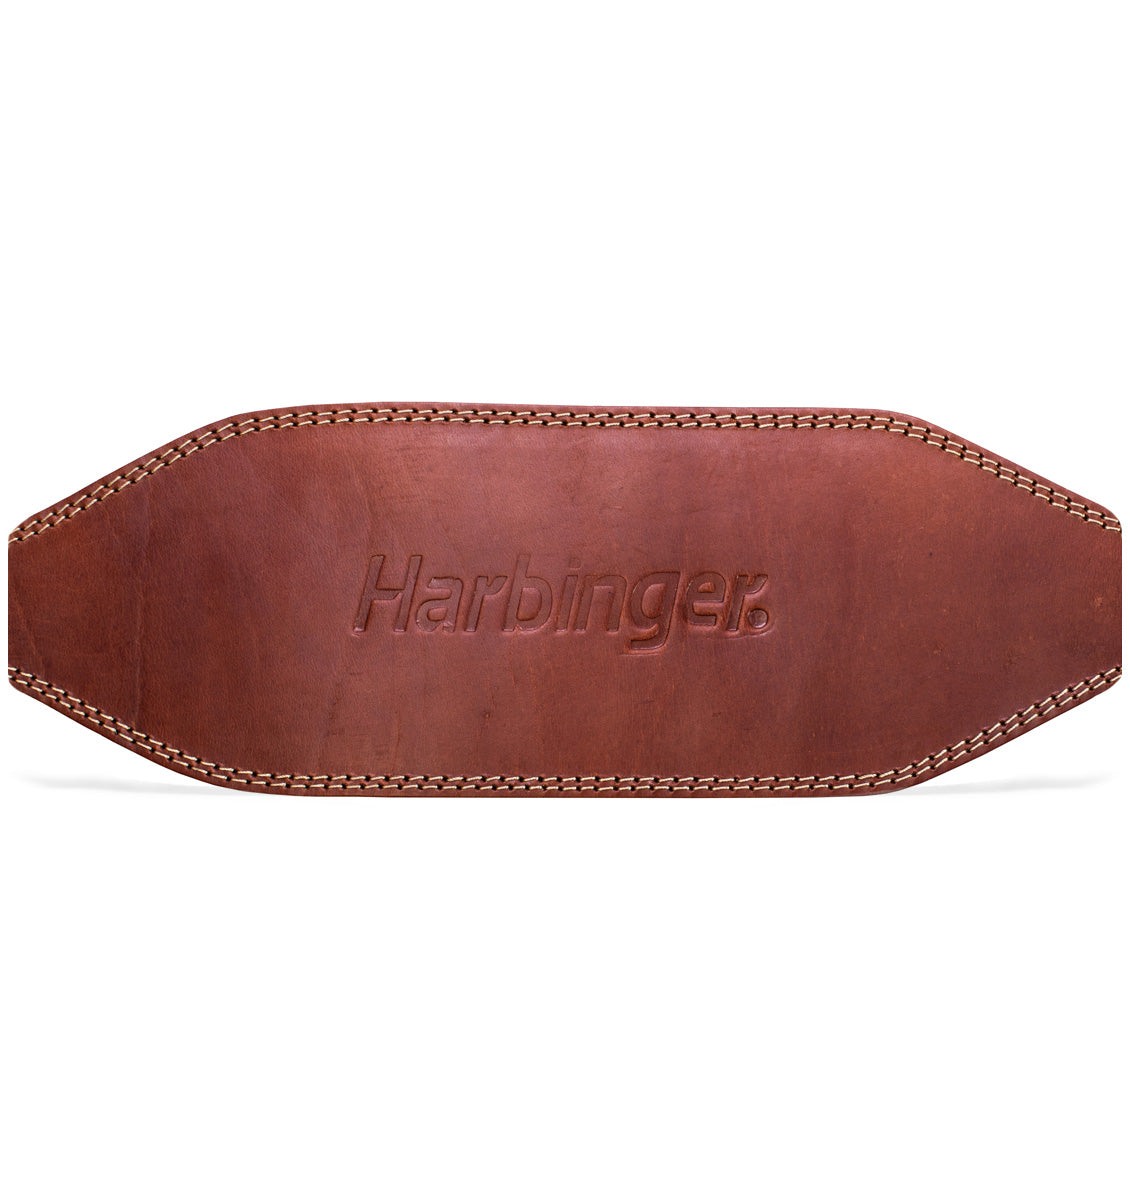 Harbinger 6 inch Oiled Leather Weight Lifting Belt - 2